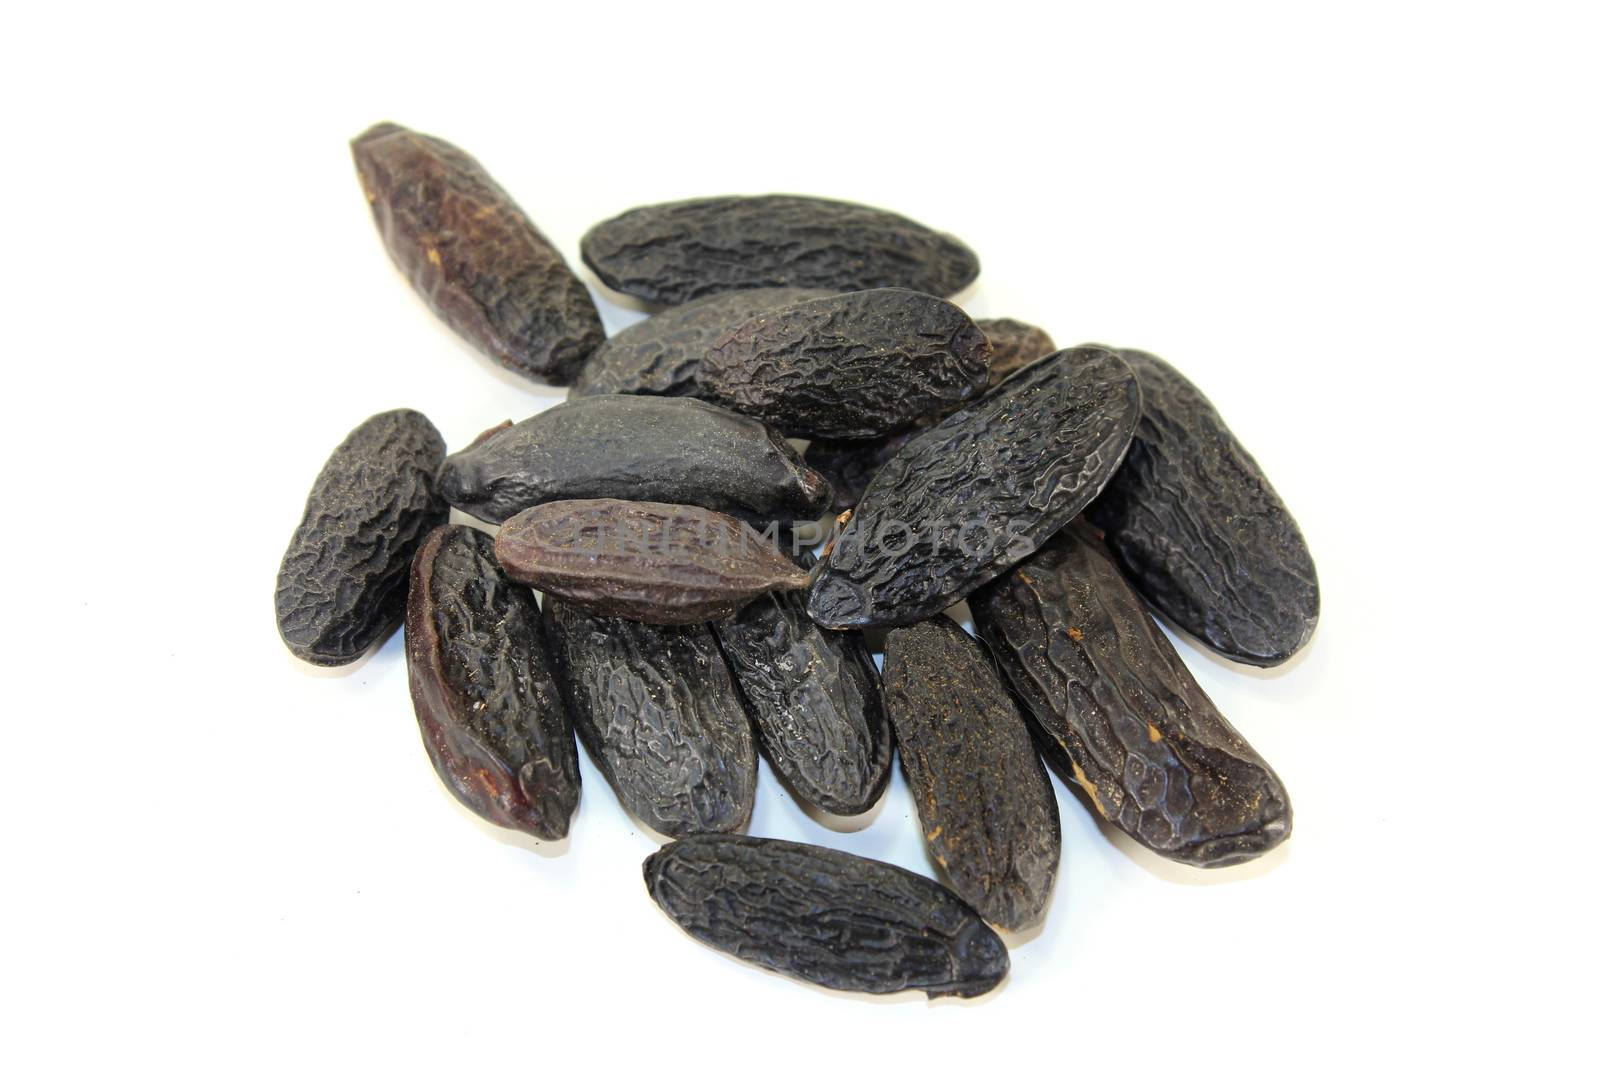 dried tonka beans on a white background